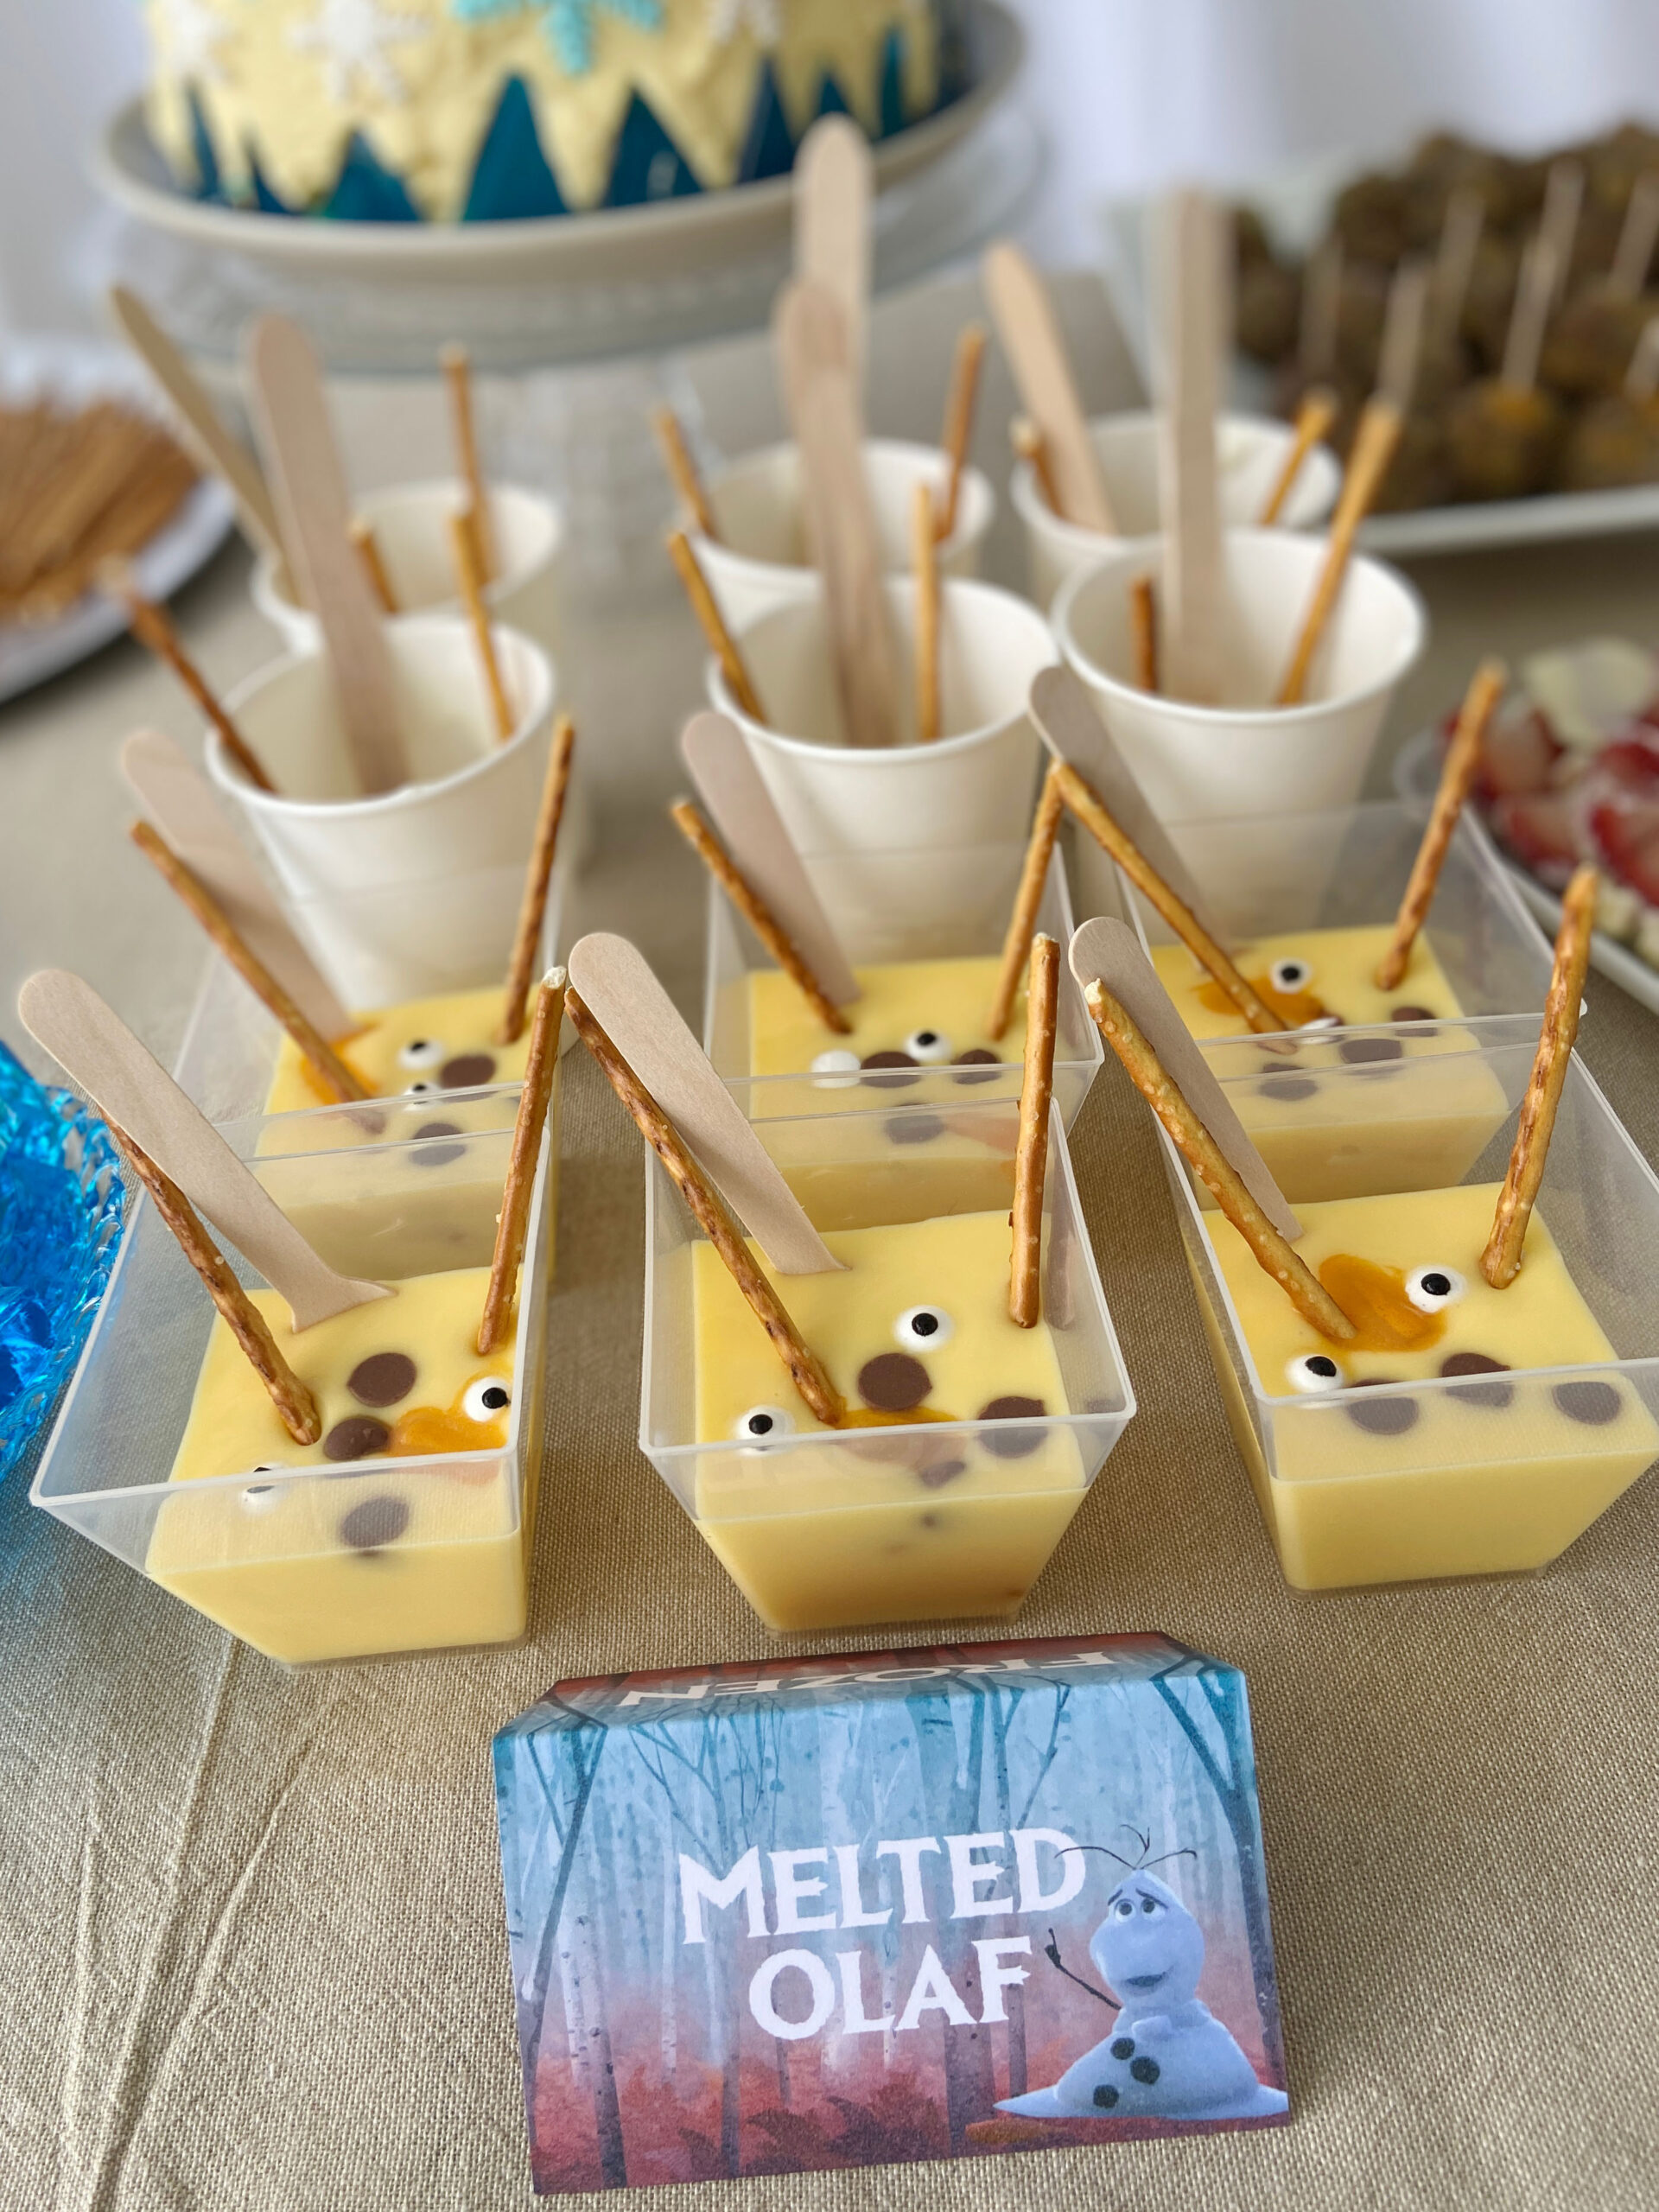 Melted Olaf's Frozen Themed Party Food